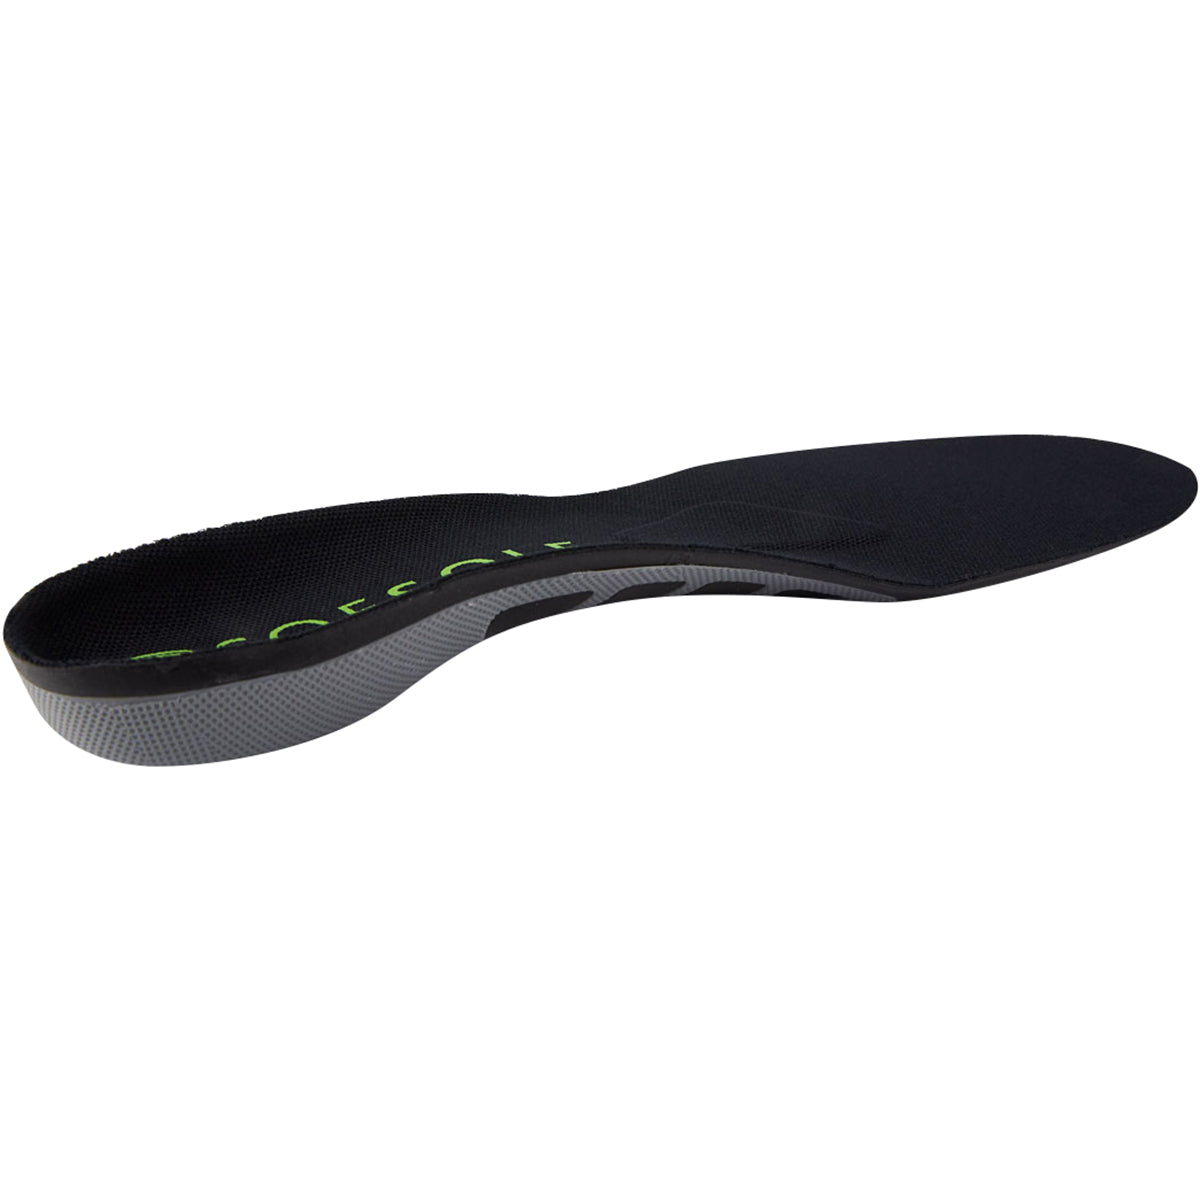 Sof Sole Orthotic Full Length Shoe Insoles SofSole